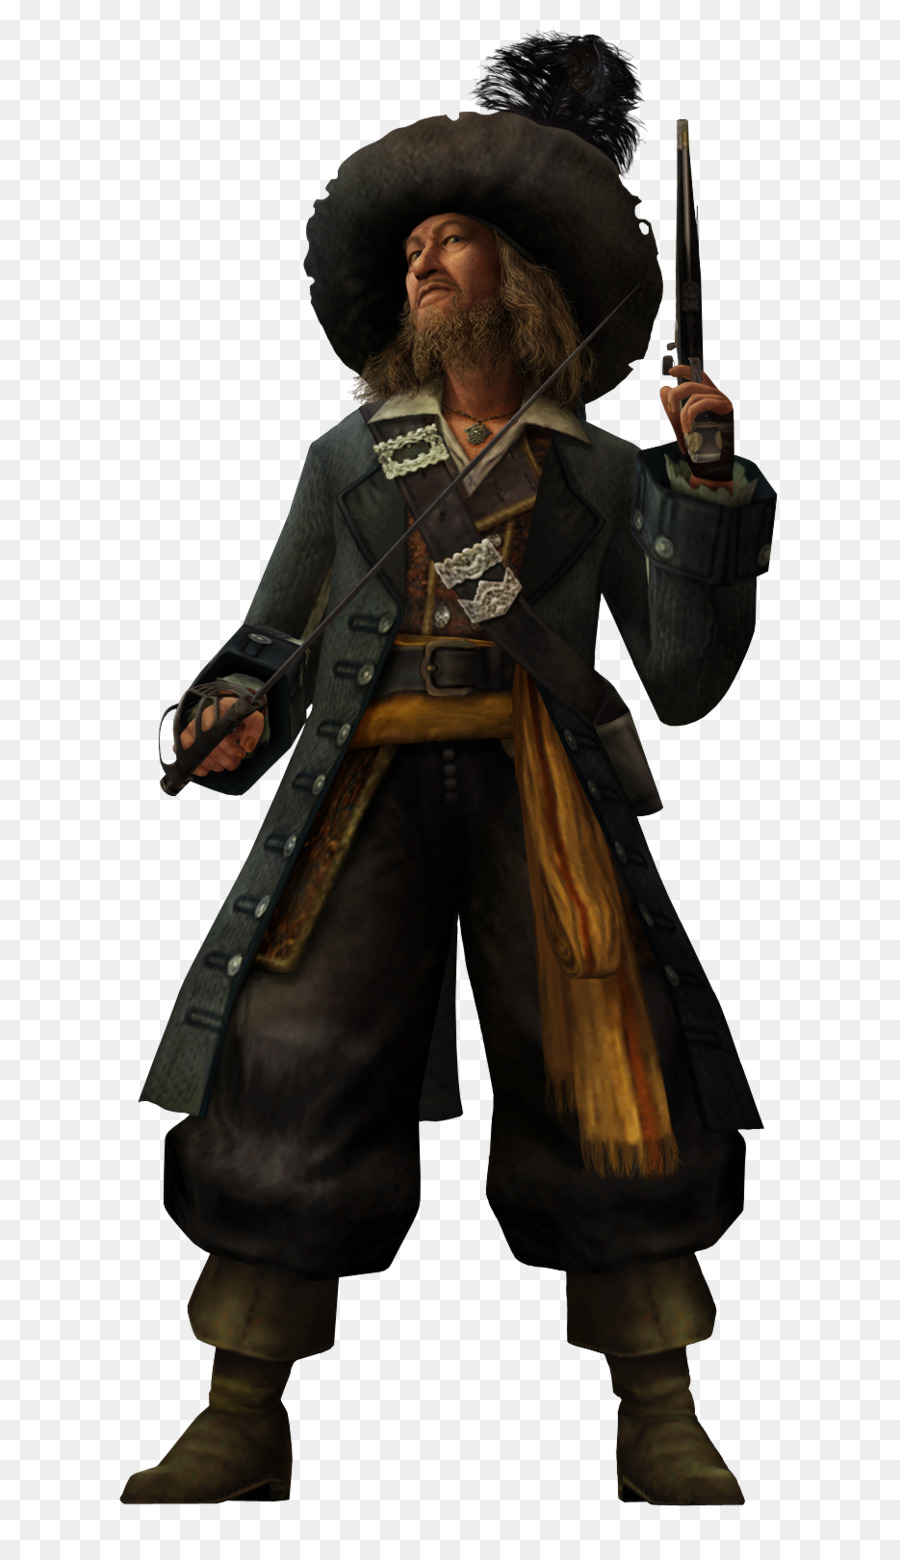 Hector Barbossa Kingdom Hearts II Jack Sparrow Captain Hook Pirates of the Caribbean - pirates of the caribbean png download - 935*1600 - Free Transparent Hector Barbossa png Download.